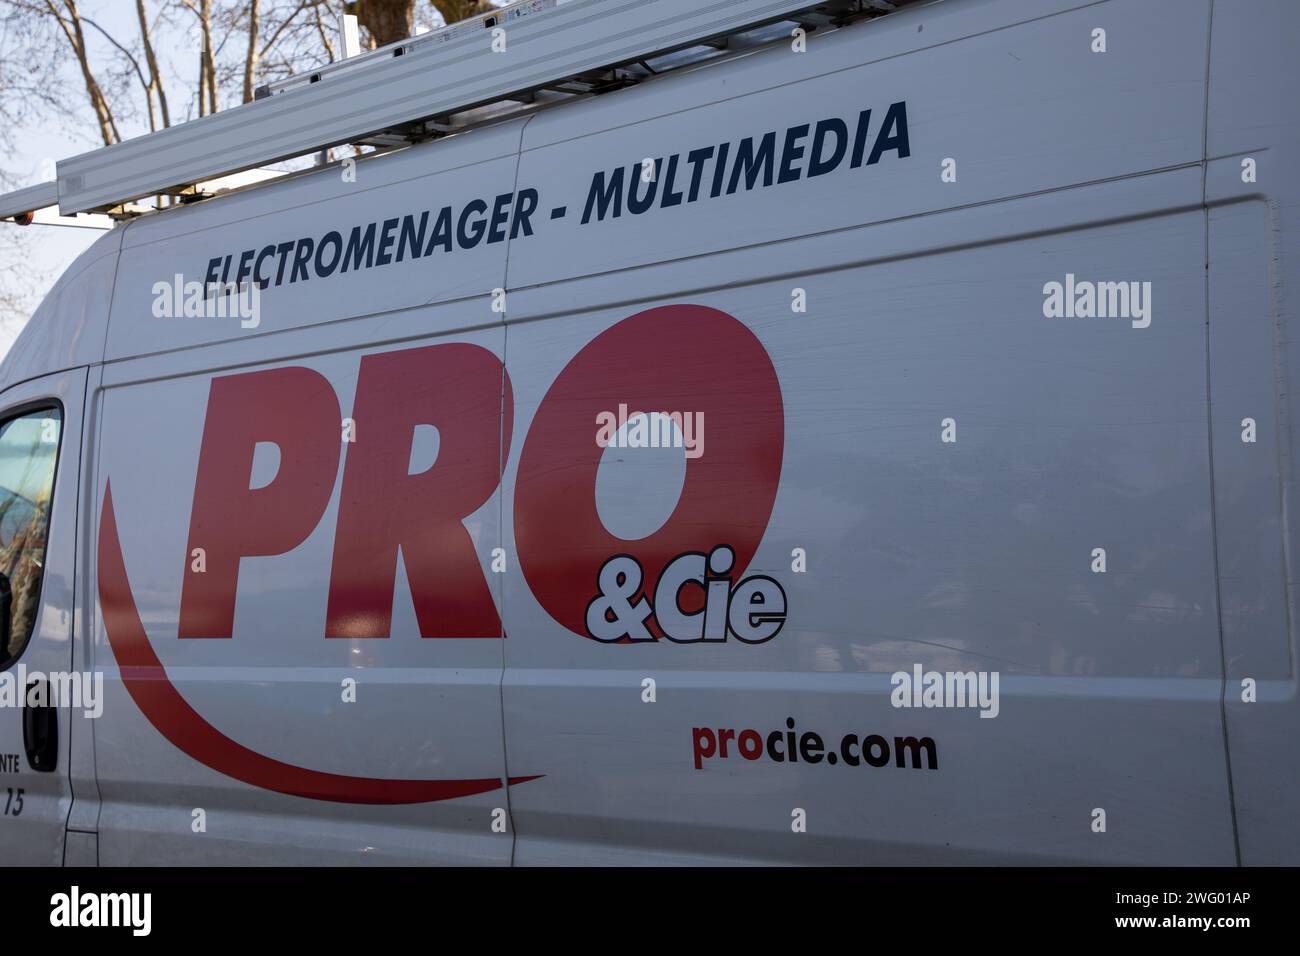 Bordeaux , France -  01 31 2024 : pro & cie logo brand and text sign shop multimedia household chain appliances bedding company on delivery panel van Stock Photo